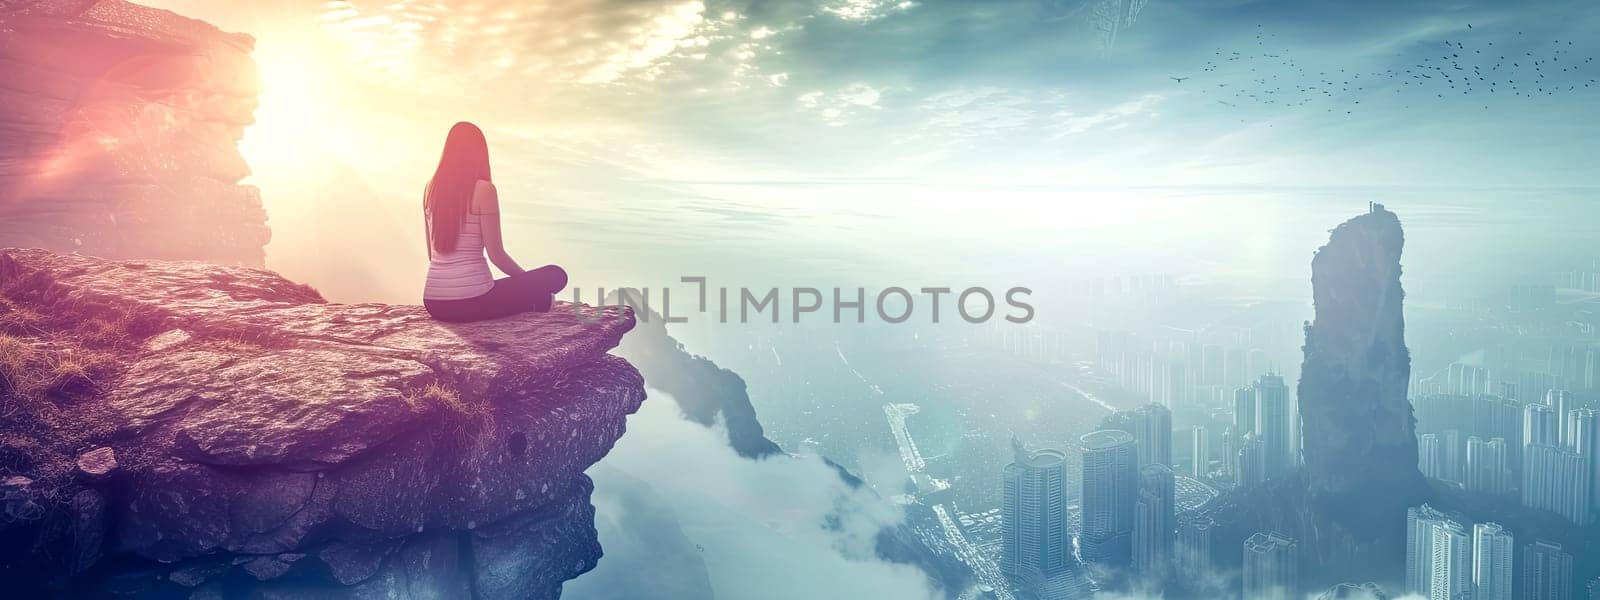 a woman is sitting on the edge of a cliff overlooking a city by Edophoto